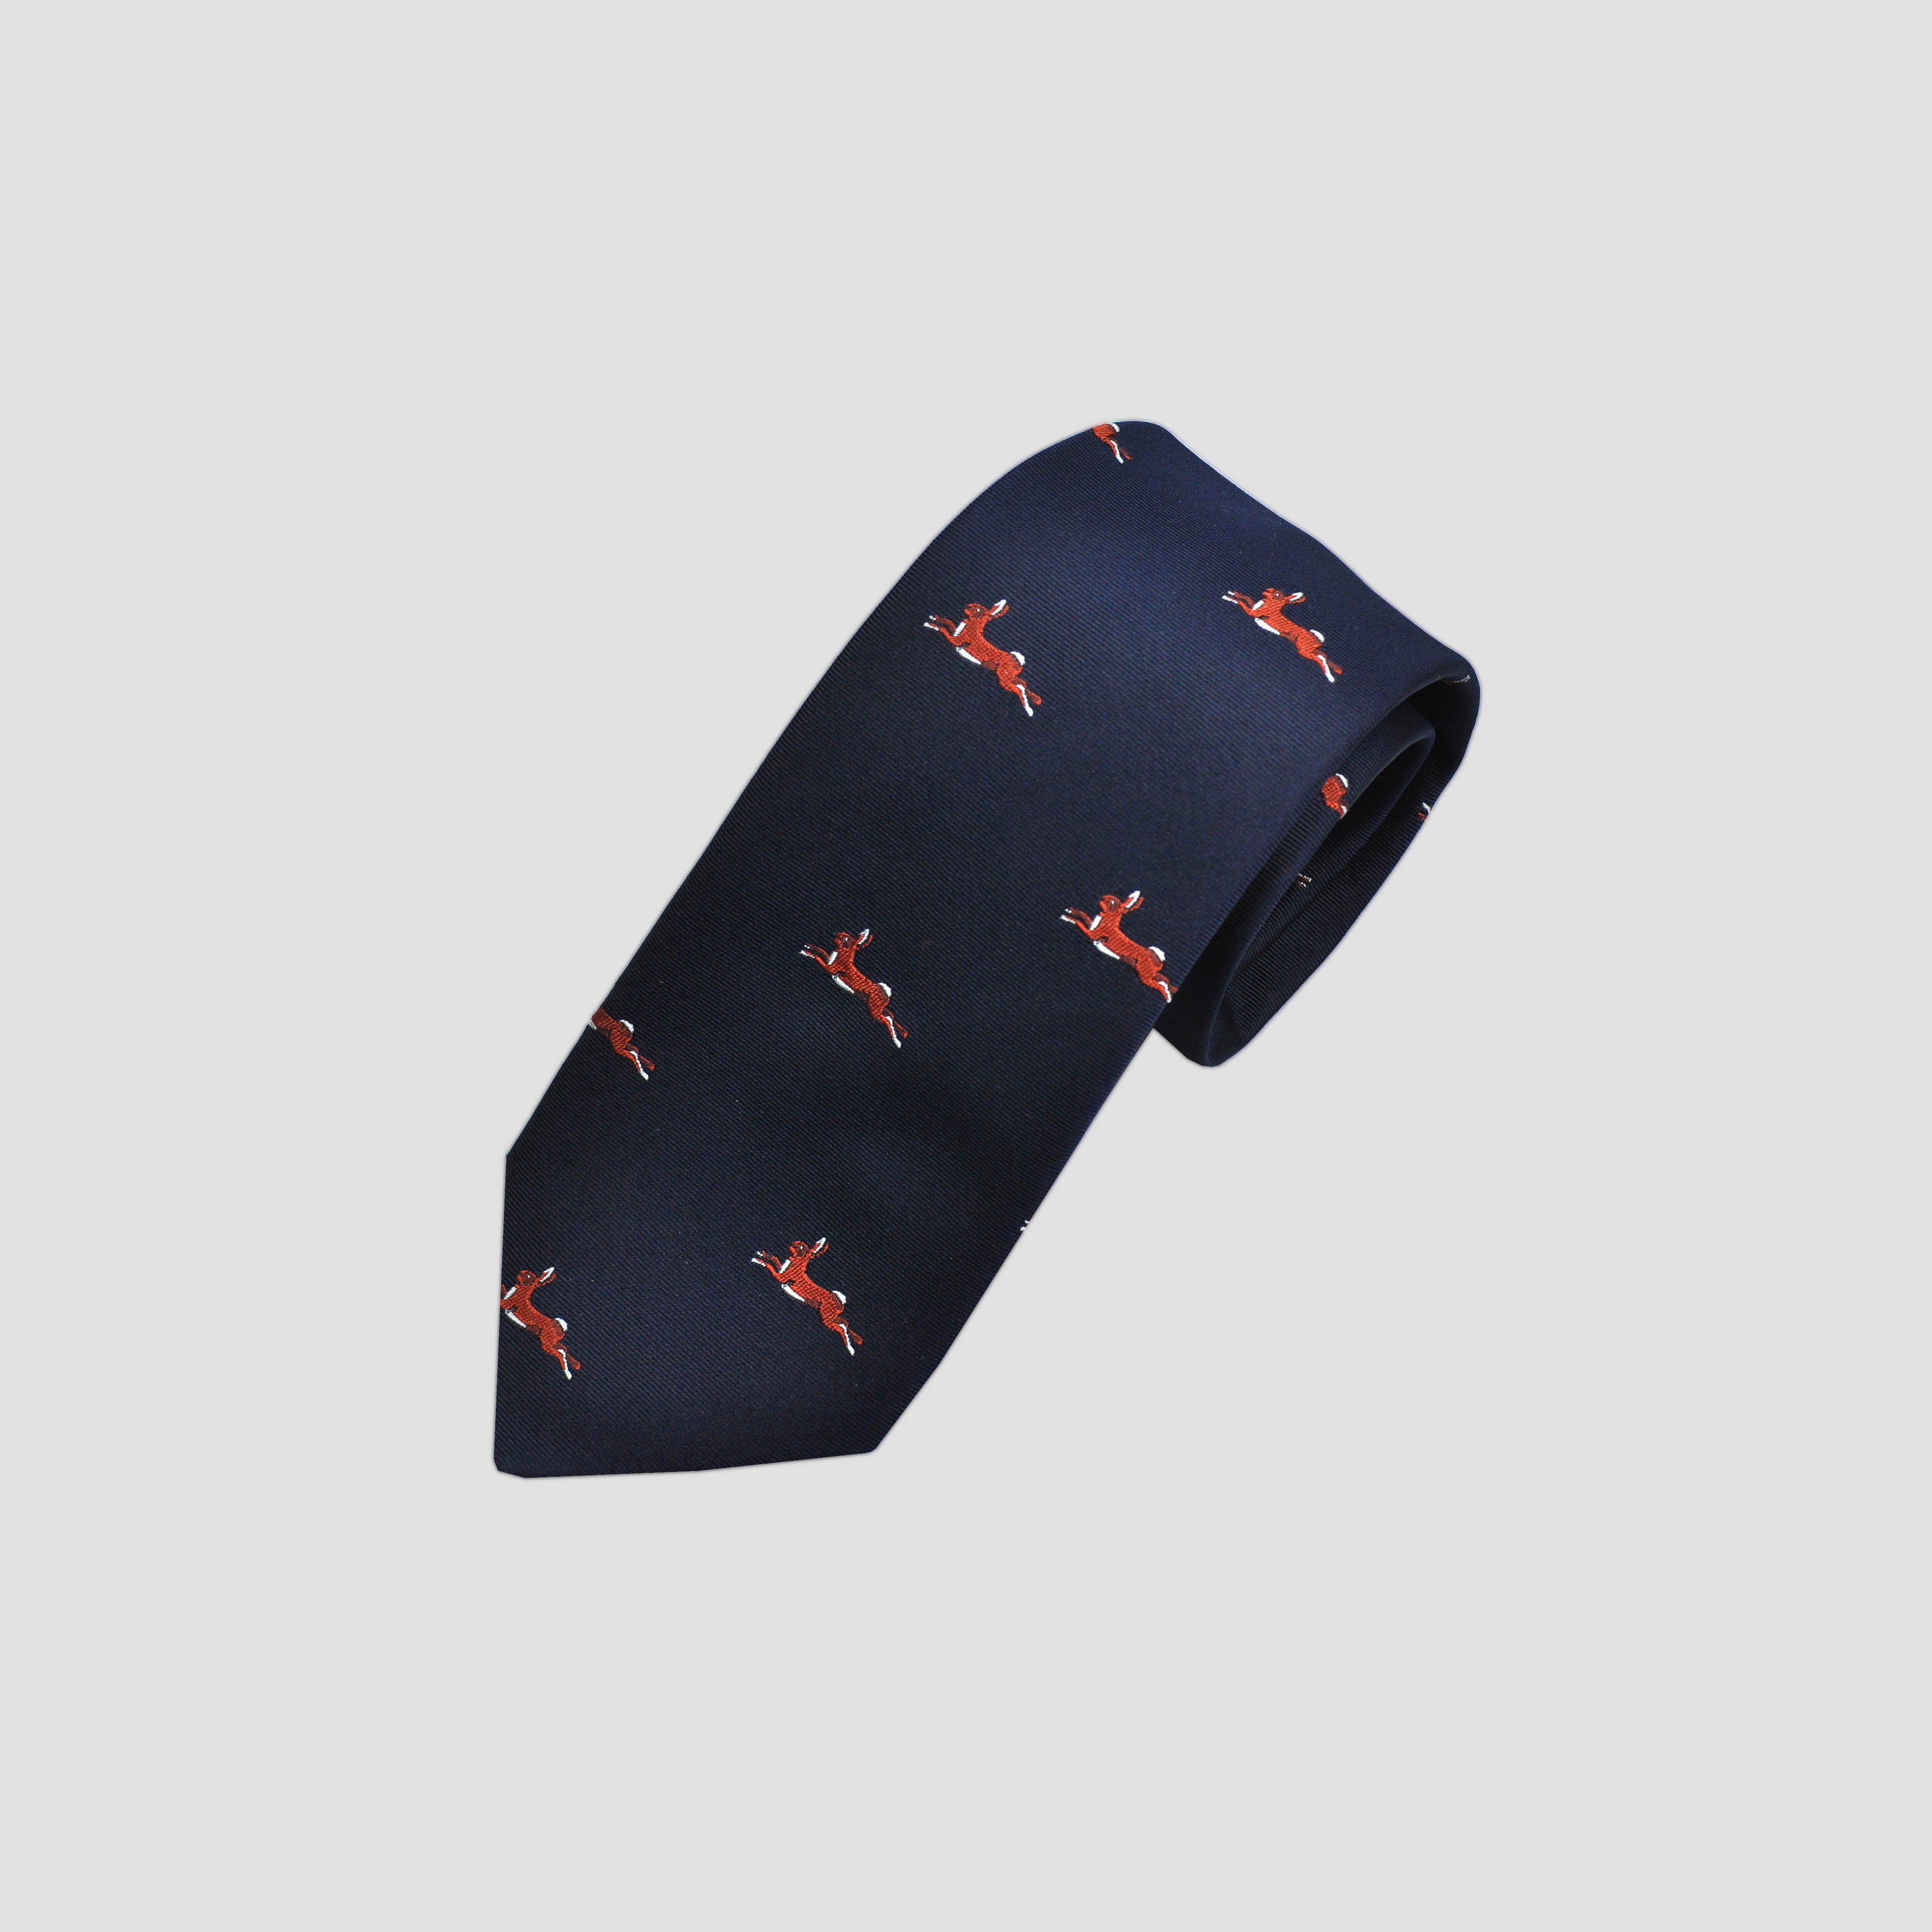 English Woven Silk 'Jumping Hare' Tie in Navy